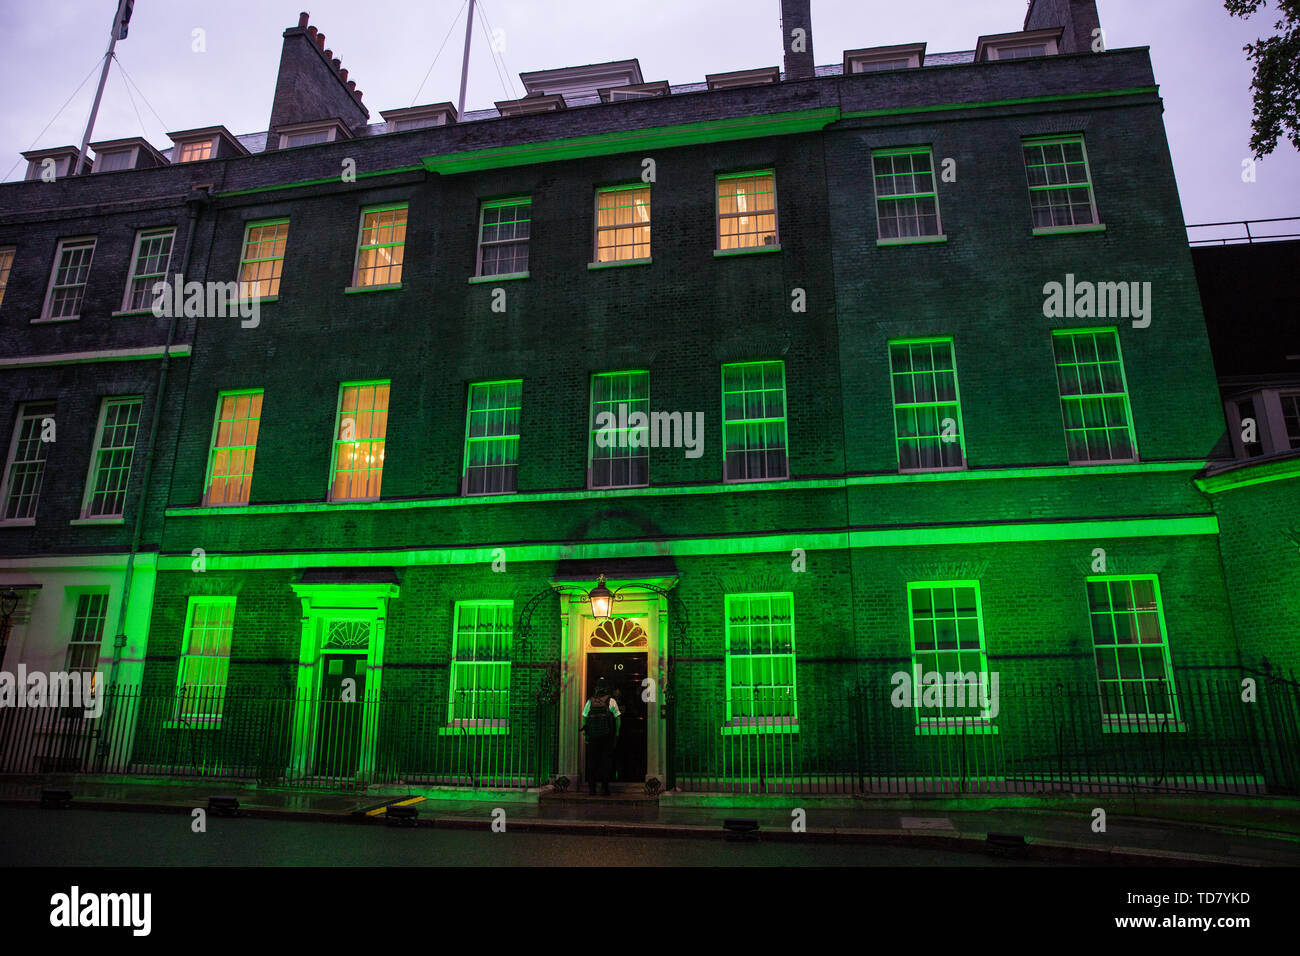 London, UK. 13 June, 2019. 10 Downing Street is lit in green to mark the second anniversary of the Grenfell Tower fire on 14th June 2017 in which 72 people died and over 70 were injured. Credit: Mark Kerrison/Alamy Live News Stock Photo